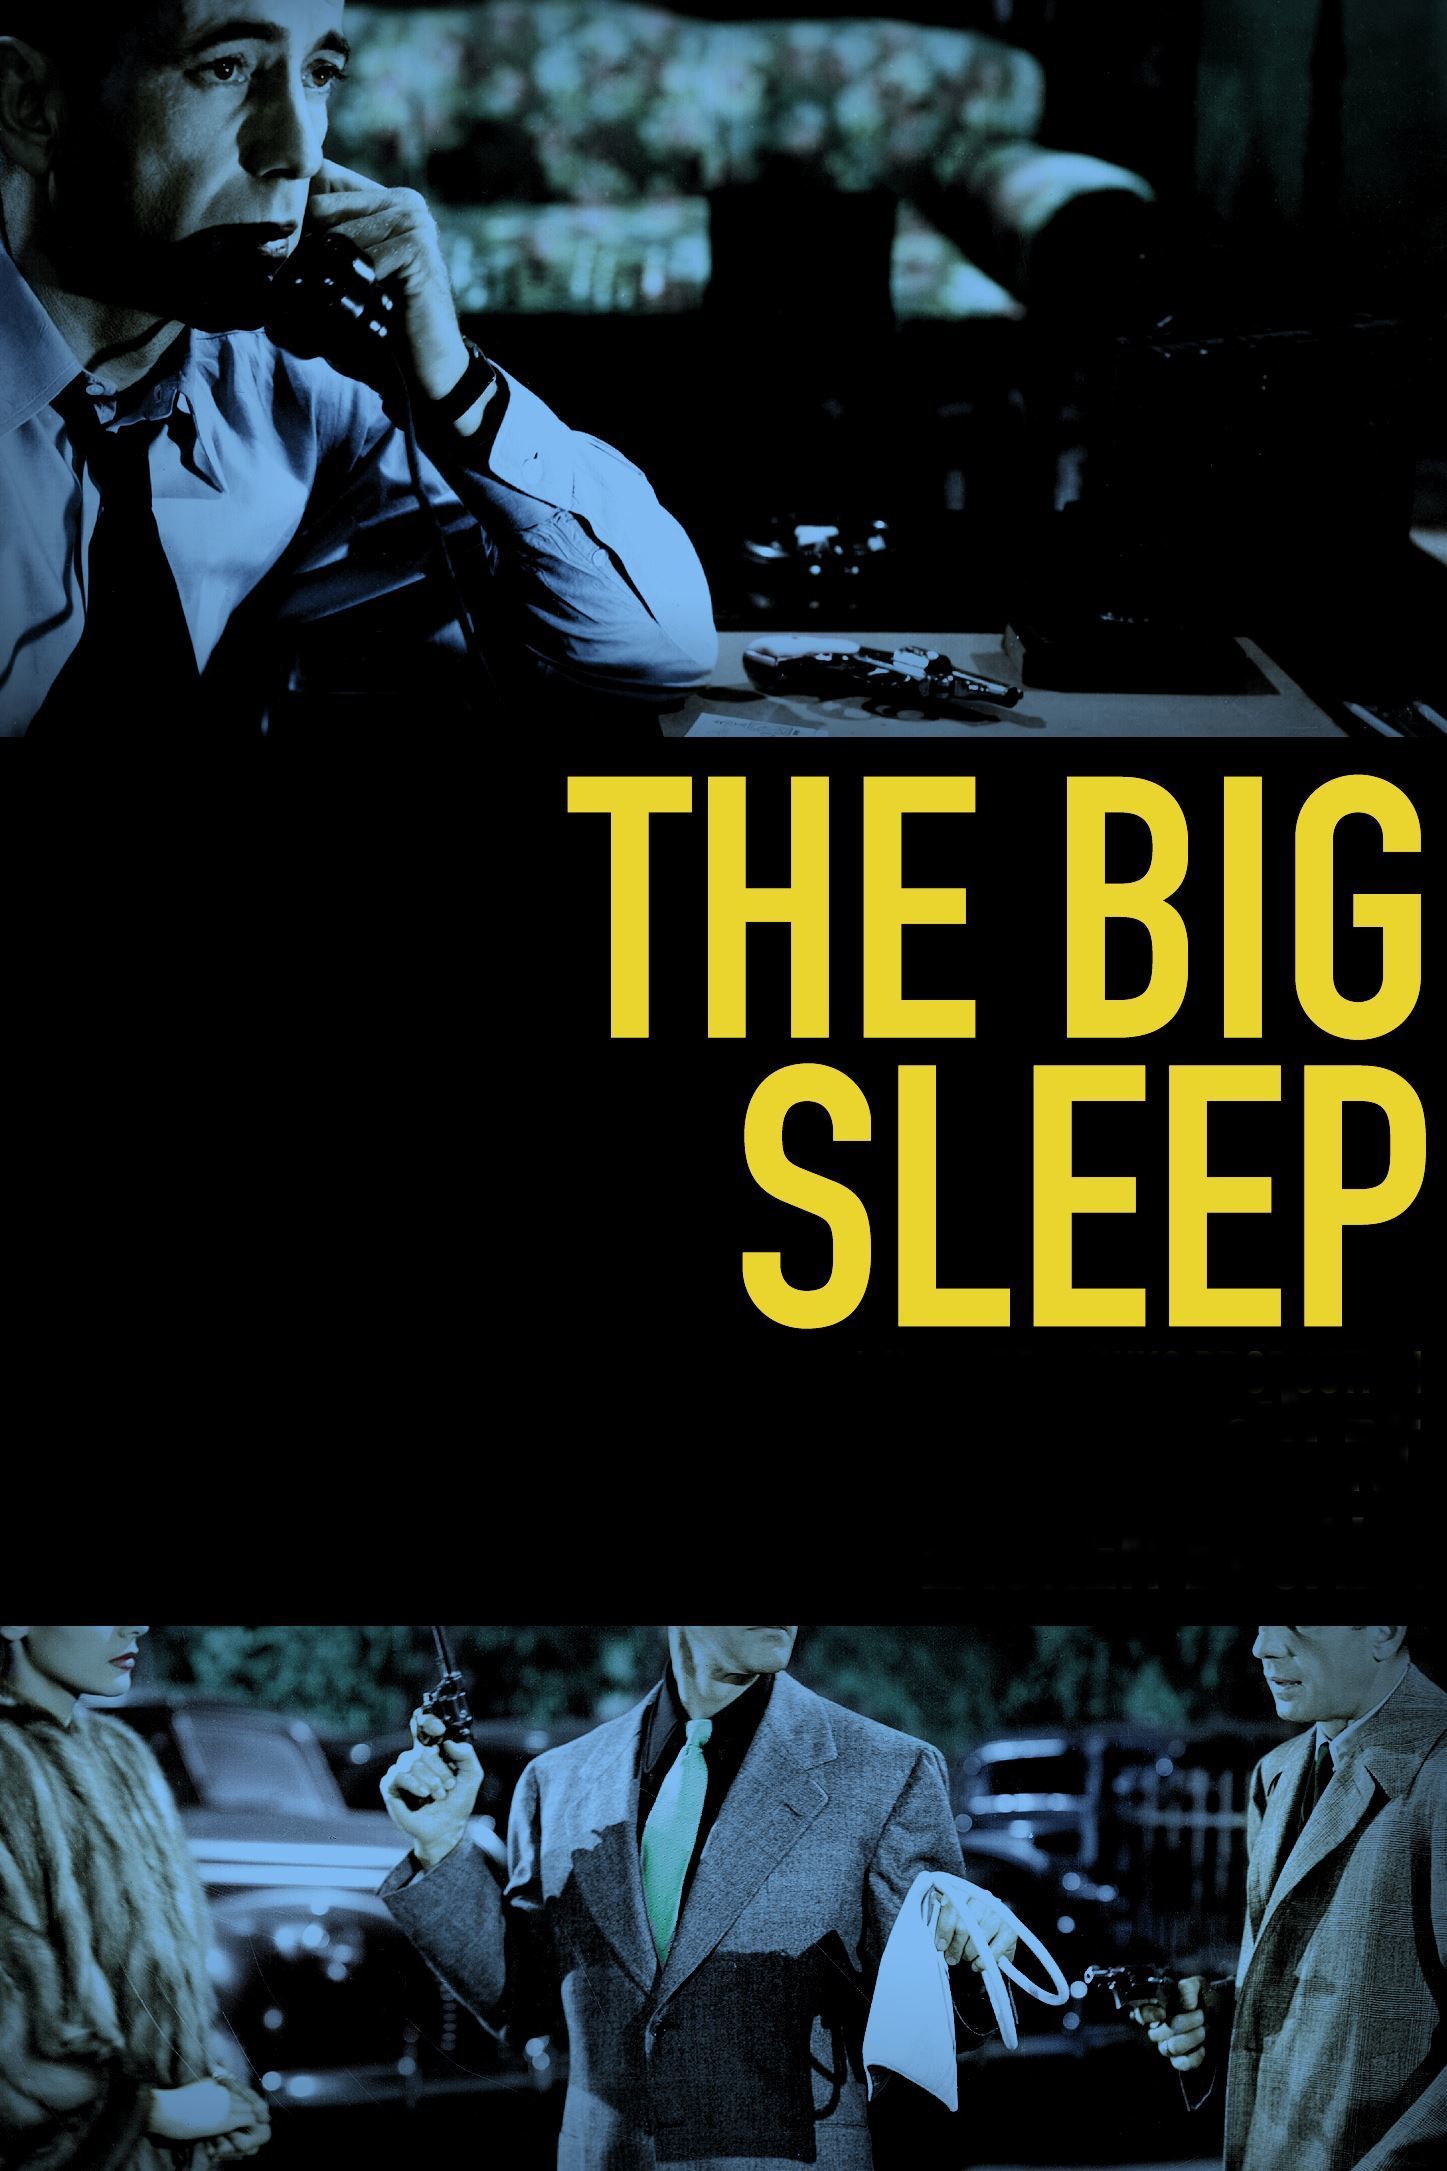 Poster for the movie "The Big Sleep"